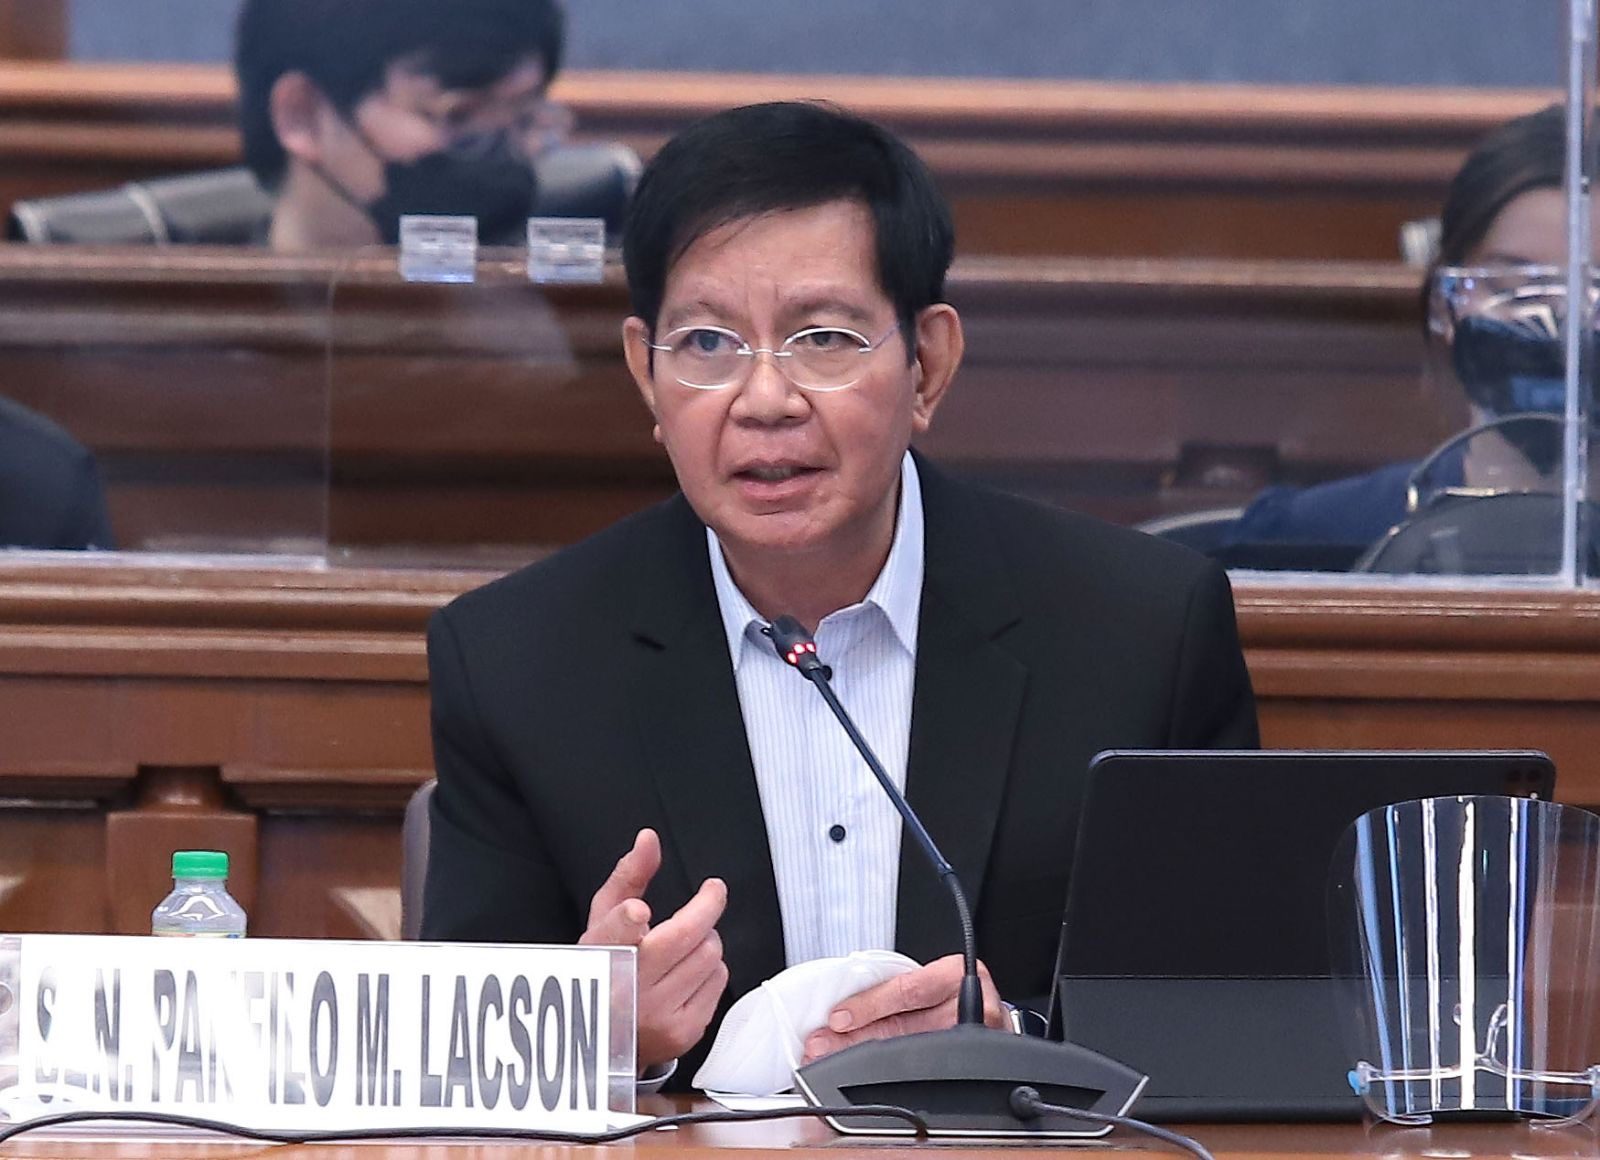 Lacson hits Duterte for ‘double standard’ in failed drug war